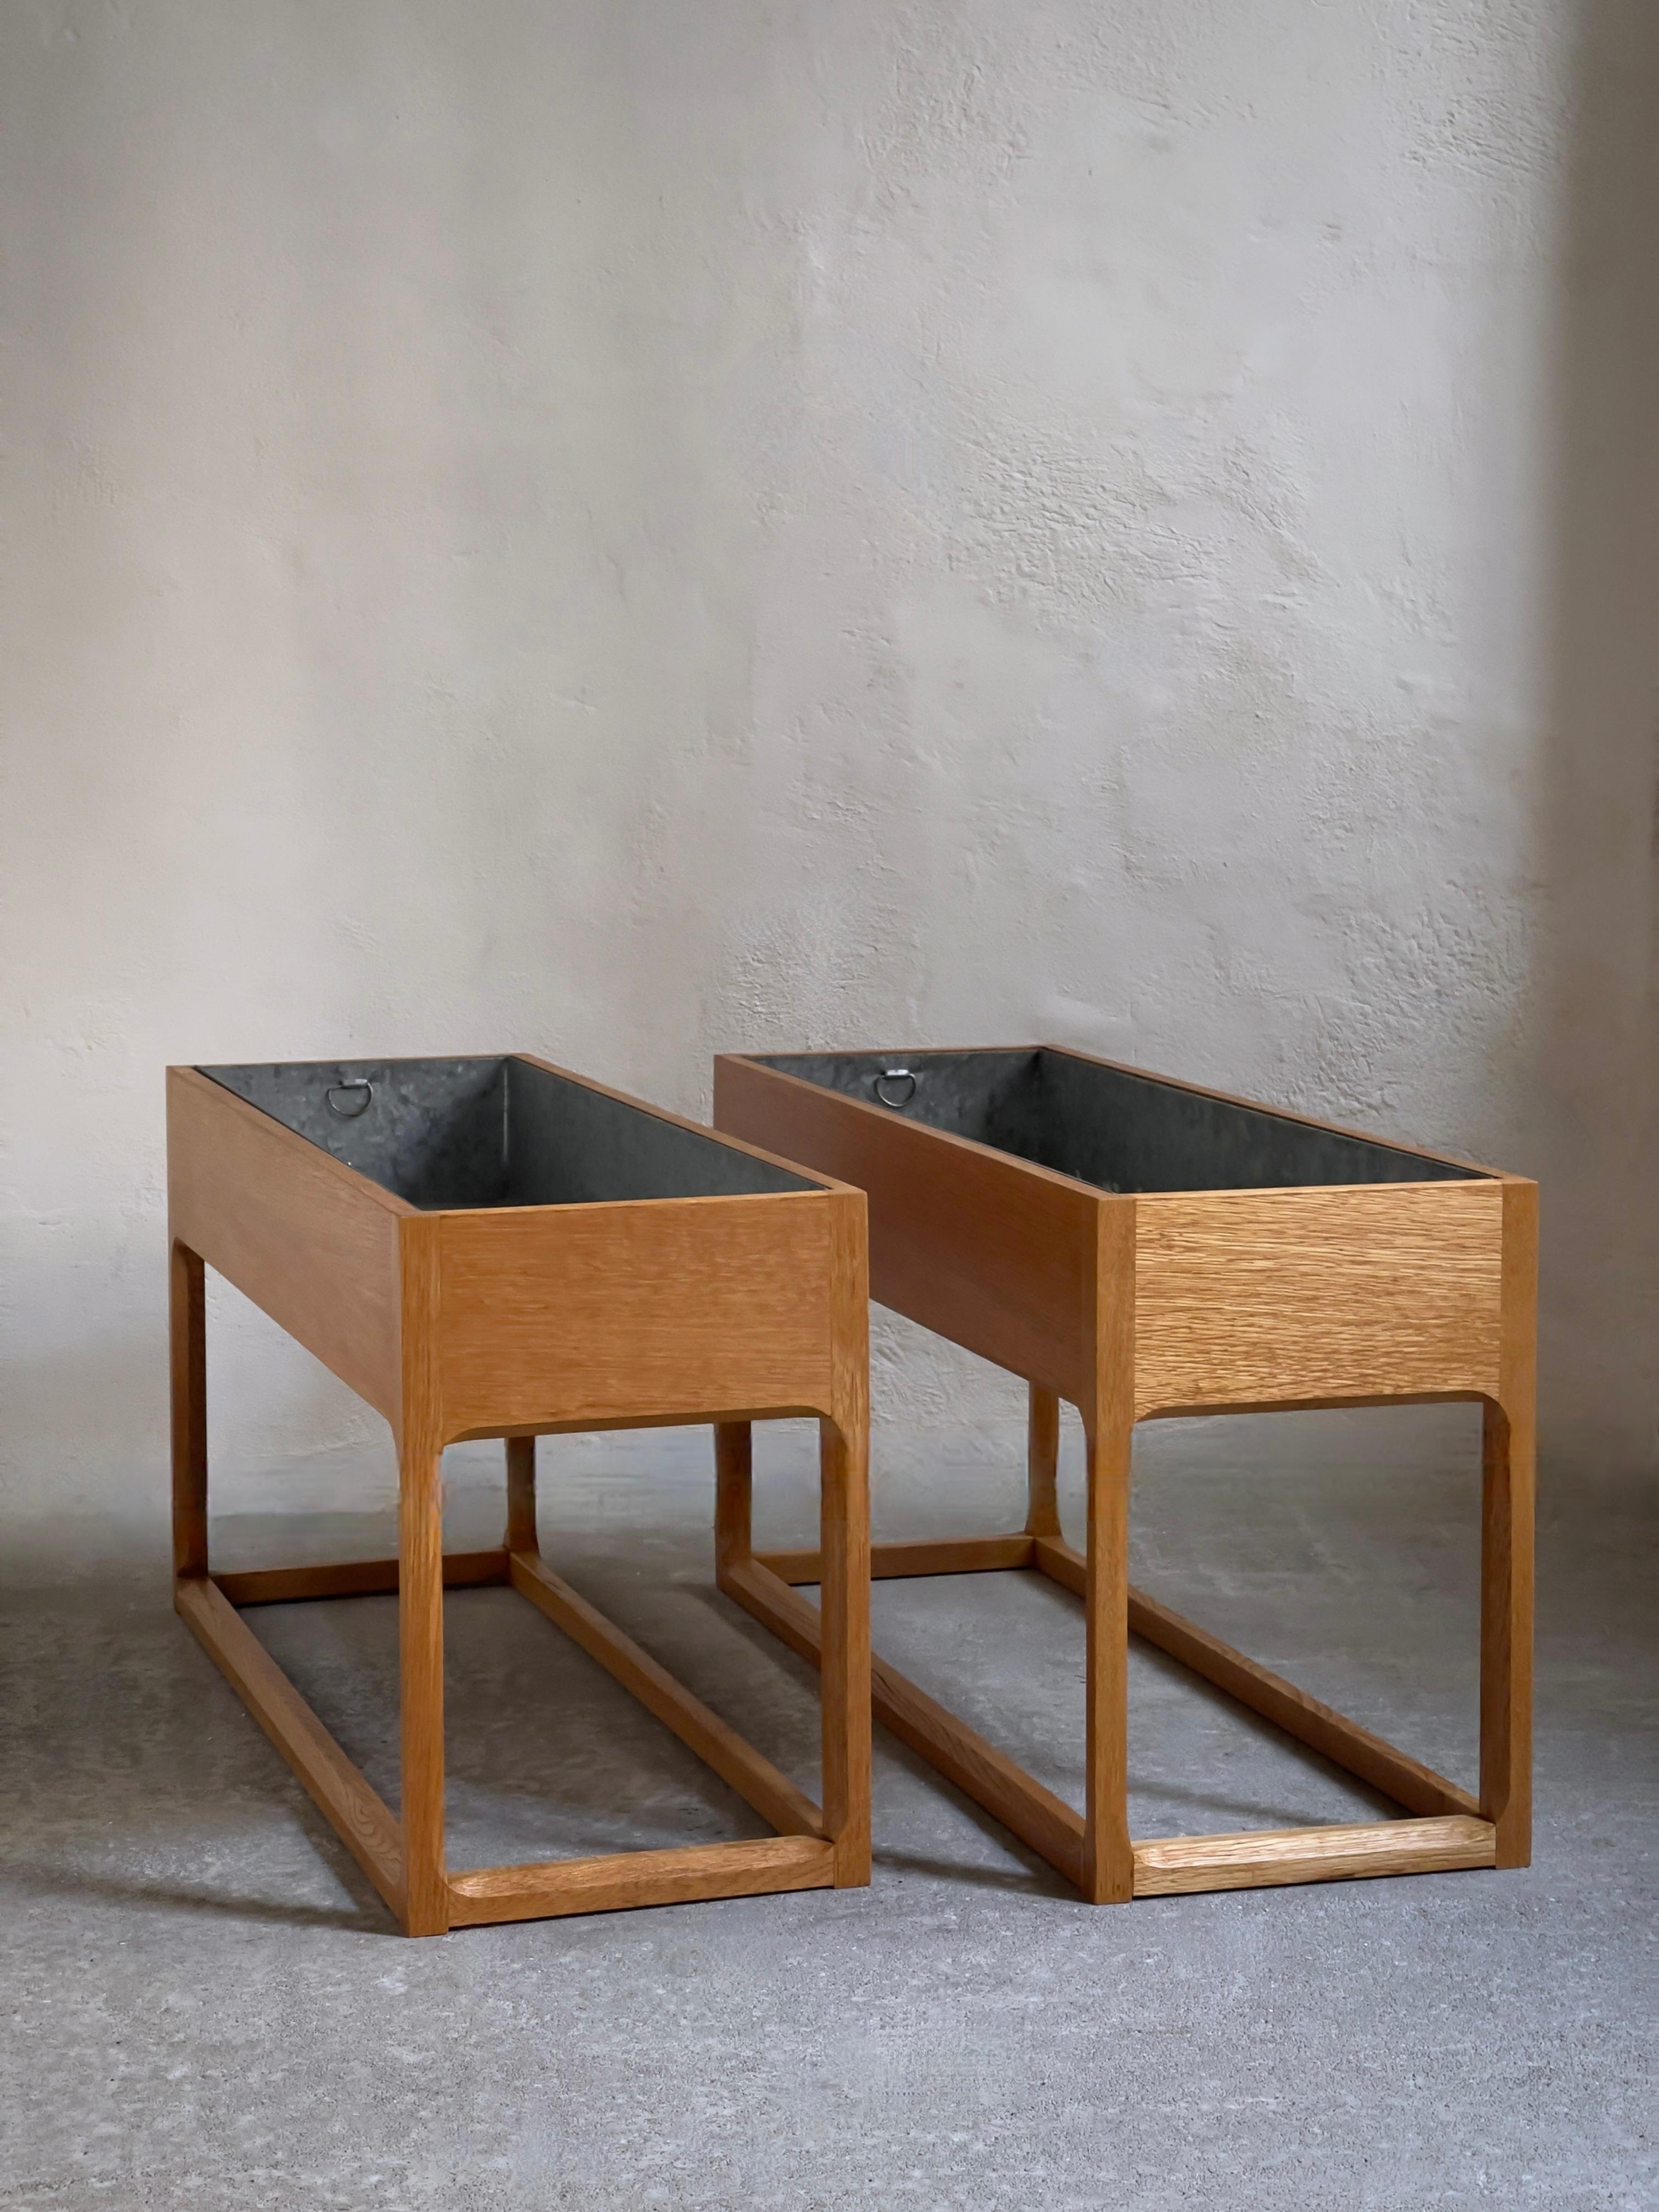 Presenting a captivating piece of Danish craftsmanship from the 1960s—a rare pair of indoor planters or jardinieres skillfully crafted by the renowned cabinetmaker Axel Kjersgaard. 

Crafted from oak, a traditional and durable hardwood, these